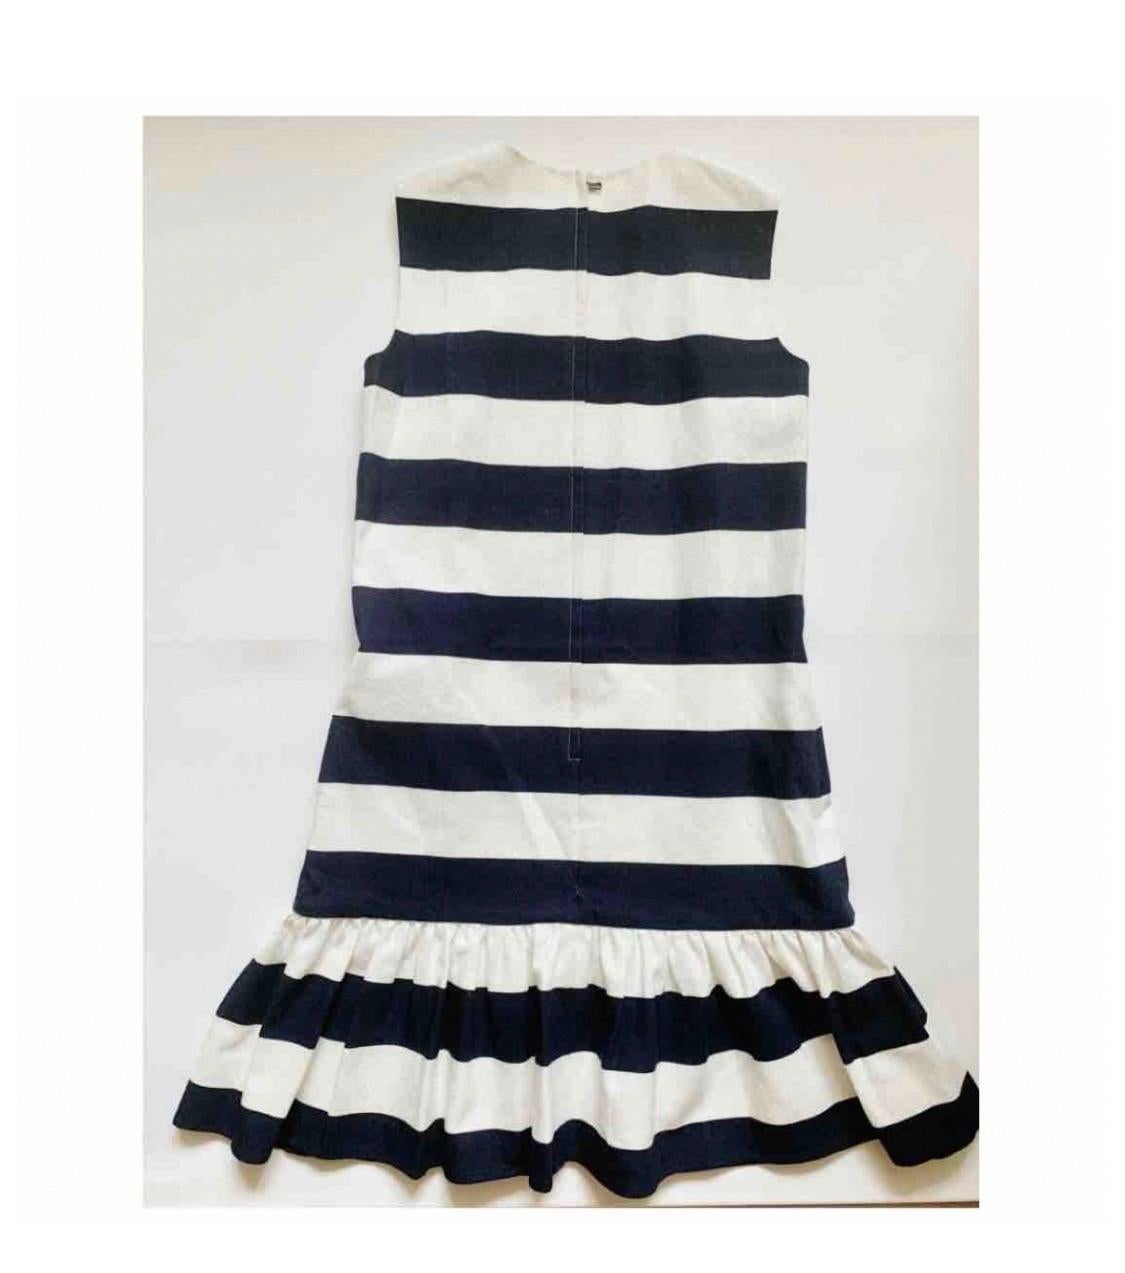 Straight striped cotton dress from

Dolce & Gabbana Navy & White.

Size 40IT UK8, S.

Length 86 cm, bust 44 cm, waist 44

cm.

99% cotton 1% elastane.

Brand new with original tags.

Please check out my other DG

clothing, bikinis and accessories